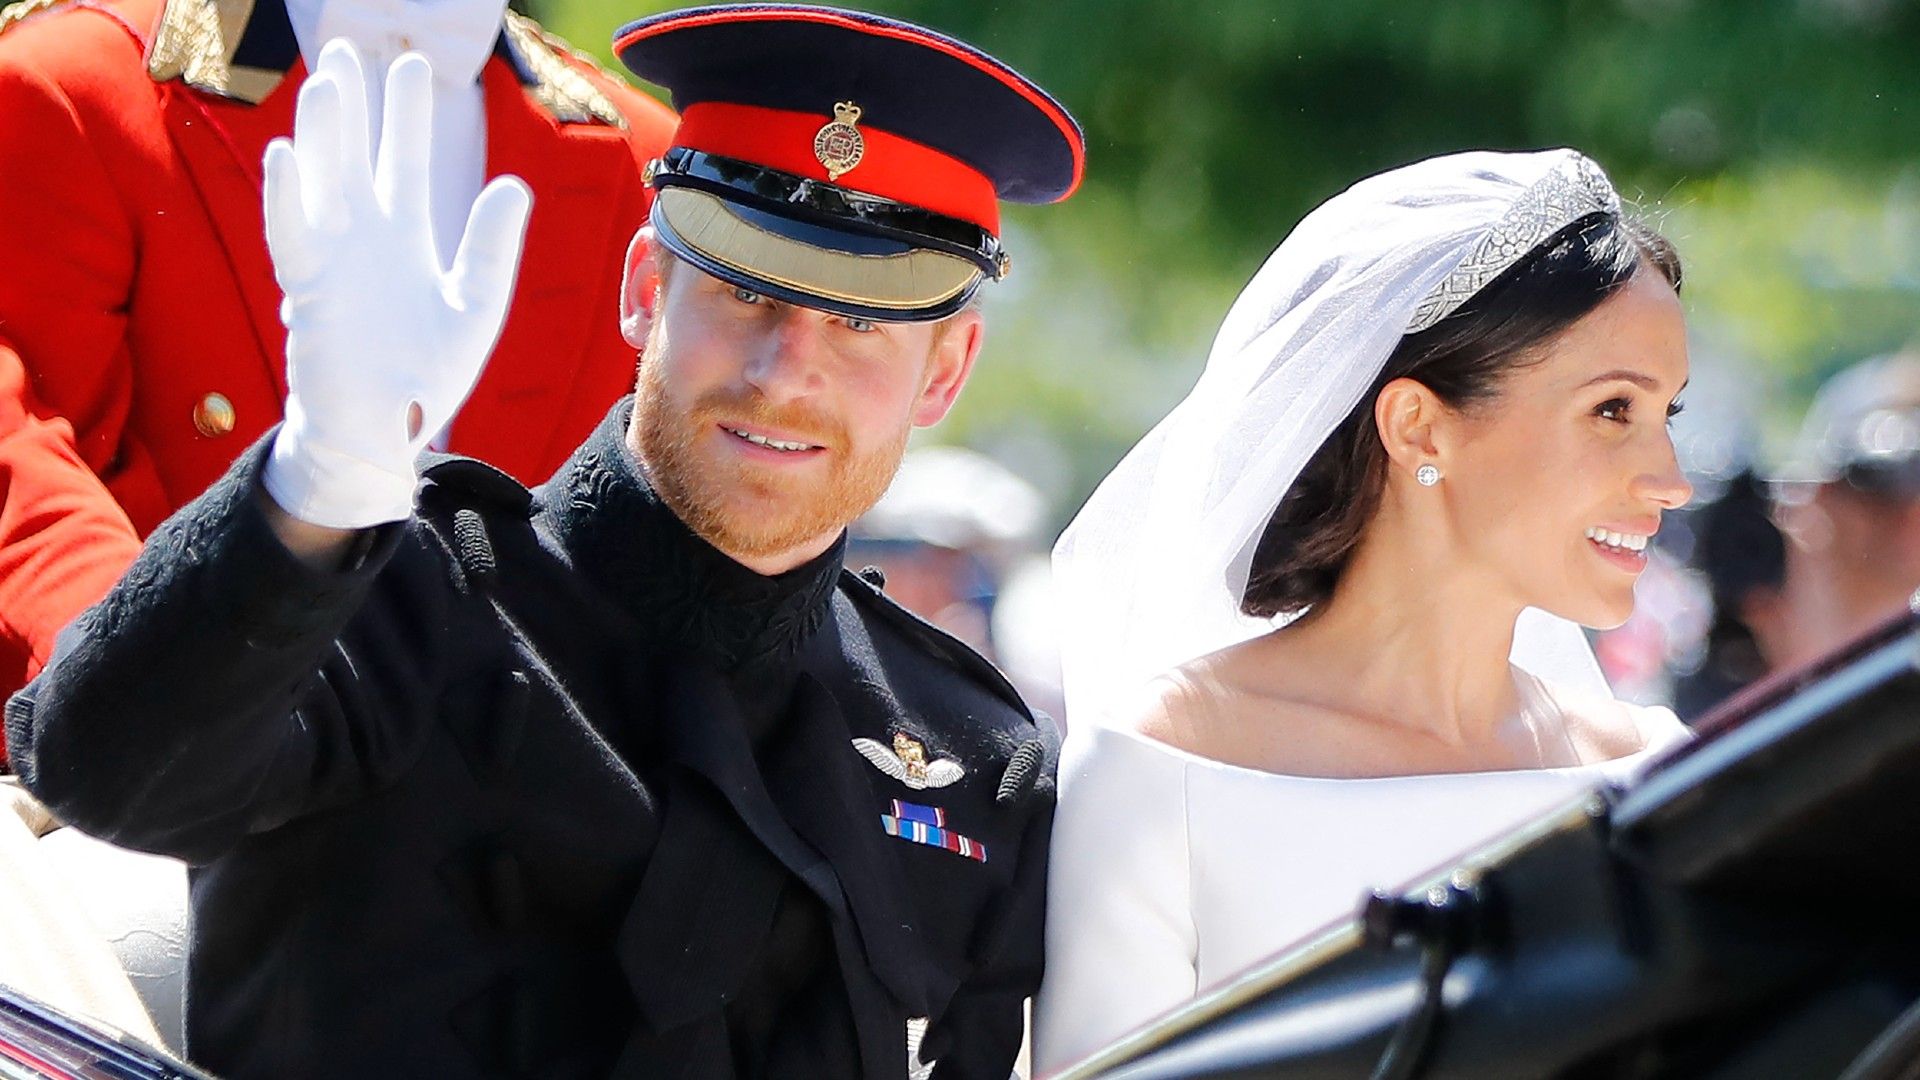 <p>                     When a royal marries, both they and their new husband or wife are usually given an entirely new title to use during their marriage.                   </p>                                      <p>                     This typically happens because male members of the royal family are entitled to a new peerage title when they get married. For example, Prince William (who until his marriage to Kate Middleton had no official title, other than Prince William), became the Duke of Cambridge after their 2011 wedding, and Catherine, the Duchess of Cambridge. The same happened when Prince Harry married Meghan Markle, with the pair becoming the Duke and Duchess of Sussex after their wedding in 2018.                    </p>